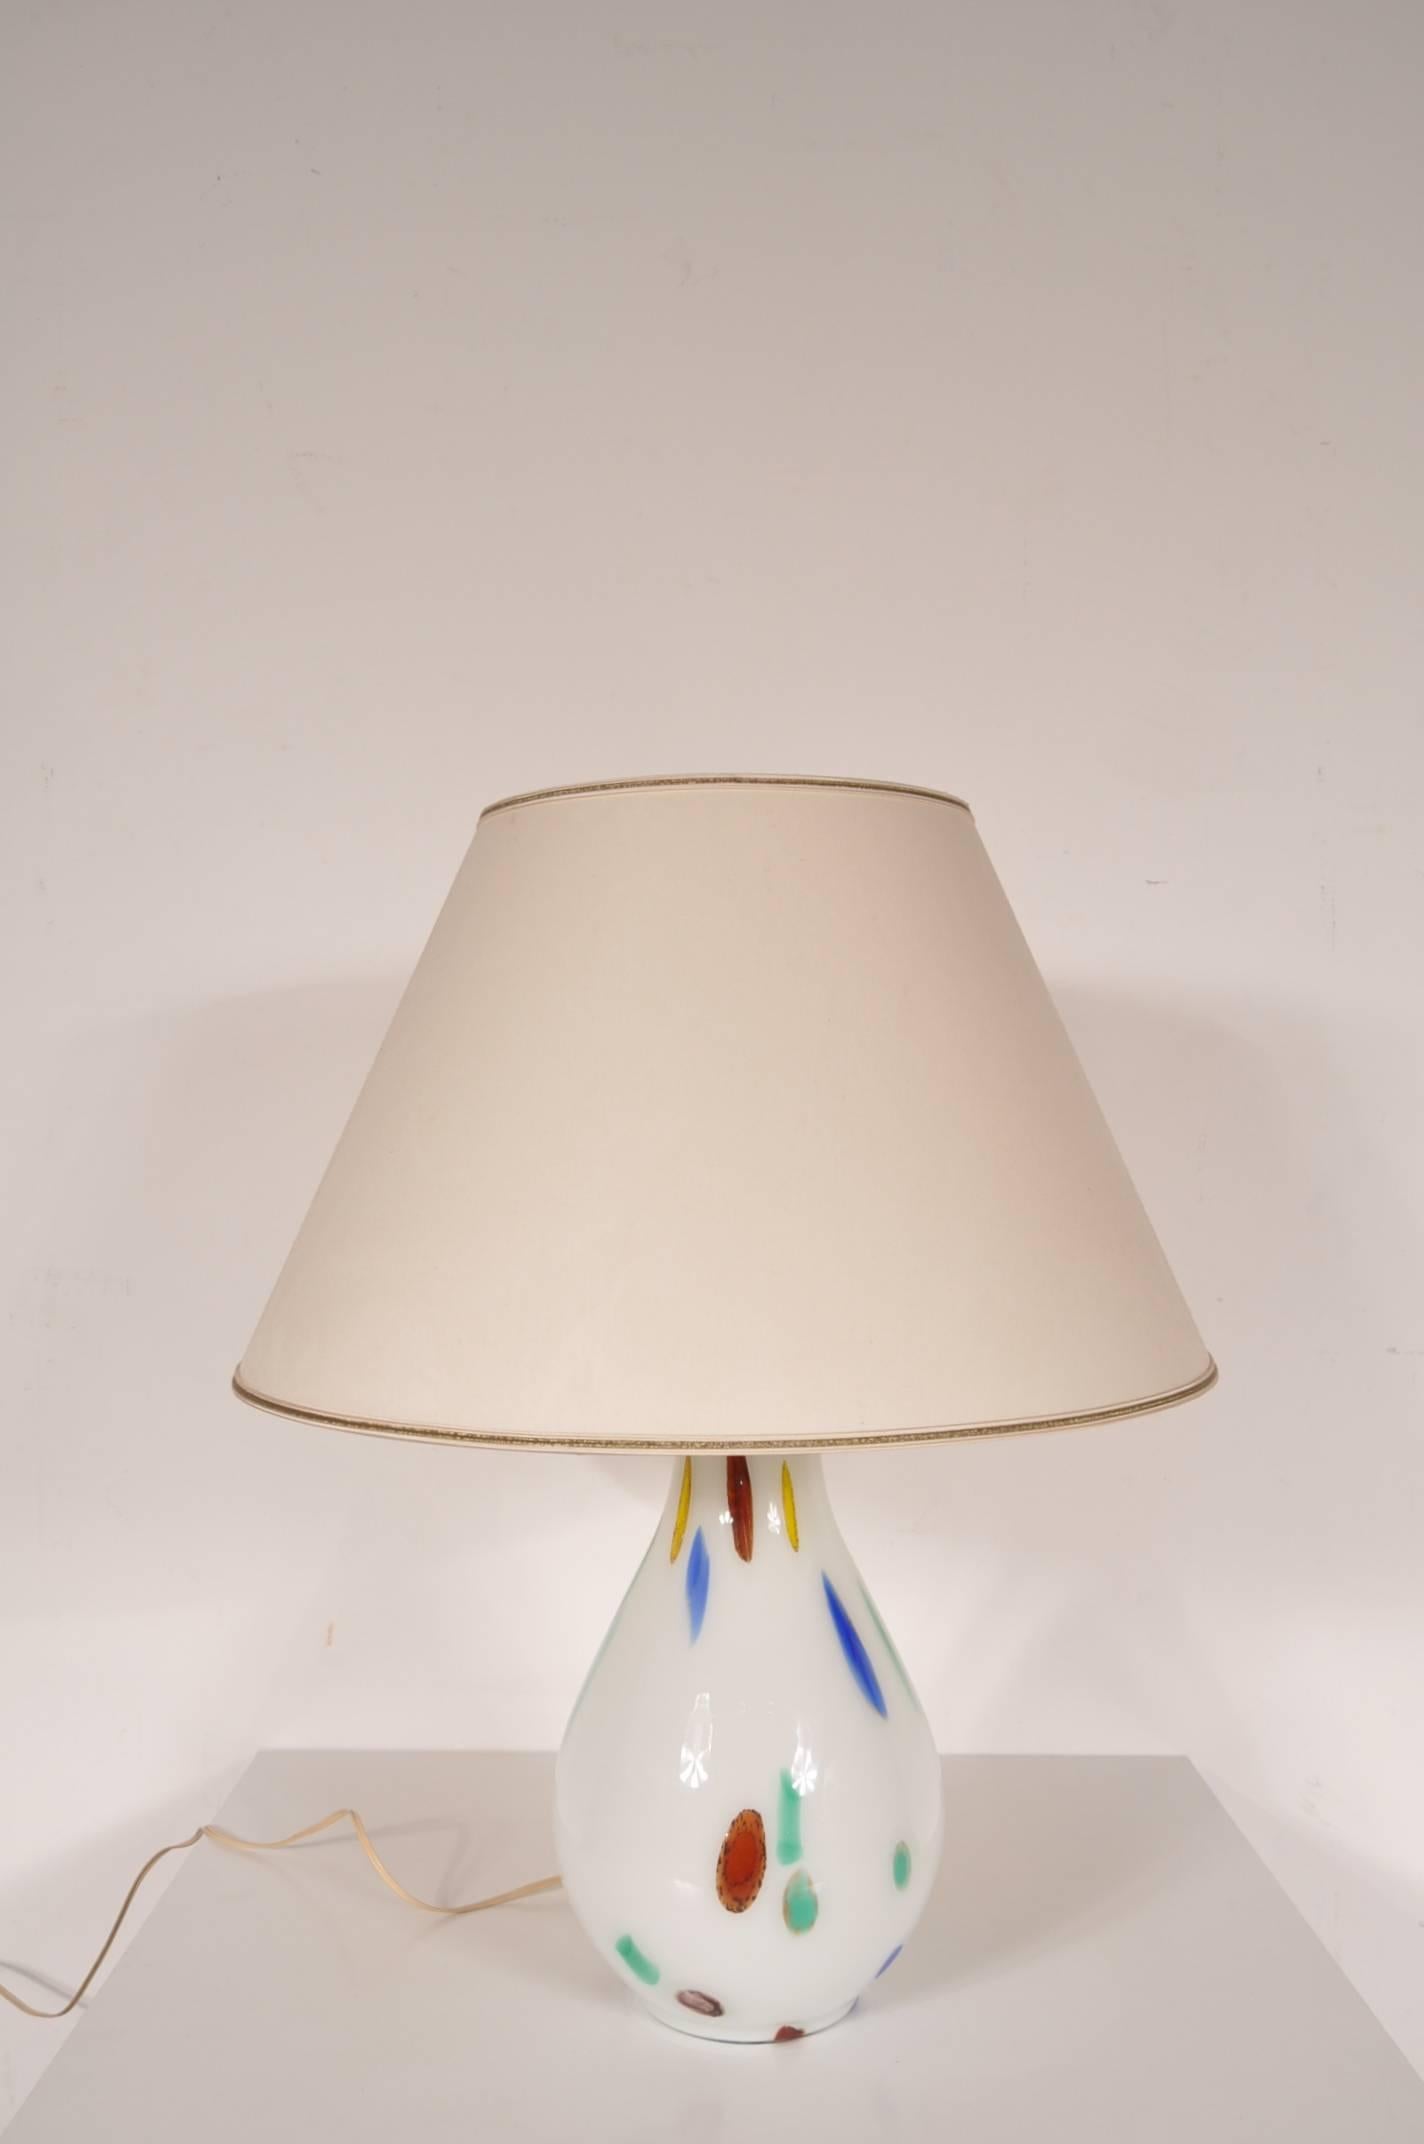 Wonderful Murano glass table lamp designed by Dino Martens, manufactured by Aureliano Toso in Murano, Italy, circa 1960.

This large model table lamp is a very rare find. It has a beautiful shaped handblown Murano glass base with colourful